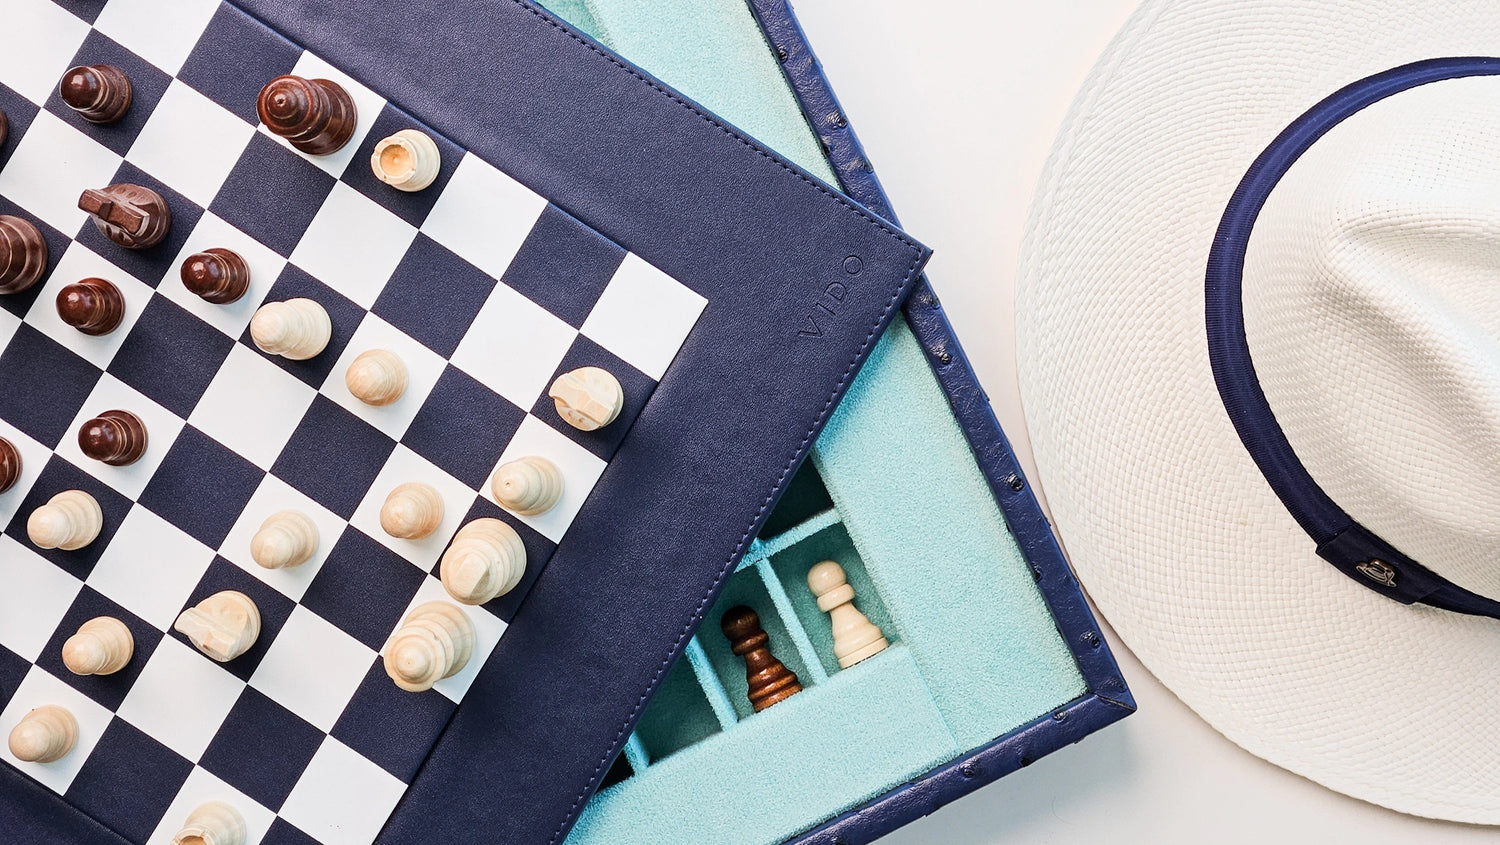 Premium Chess Set In Navy Blue Vegan Leather By VIDO